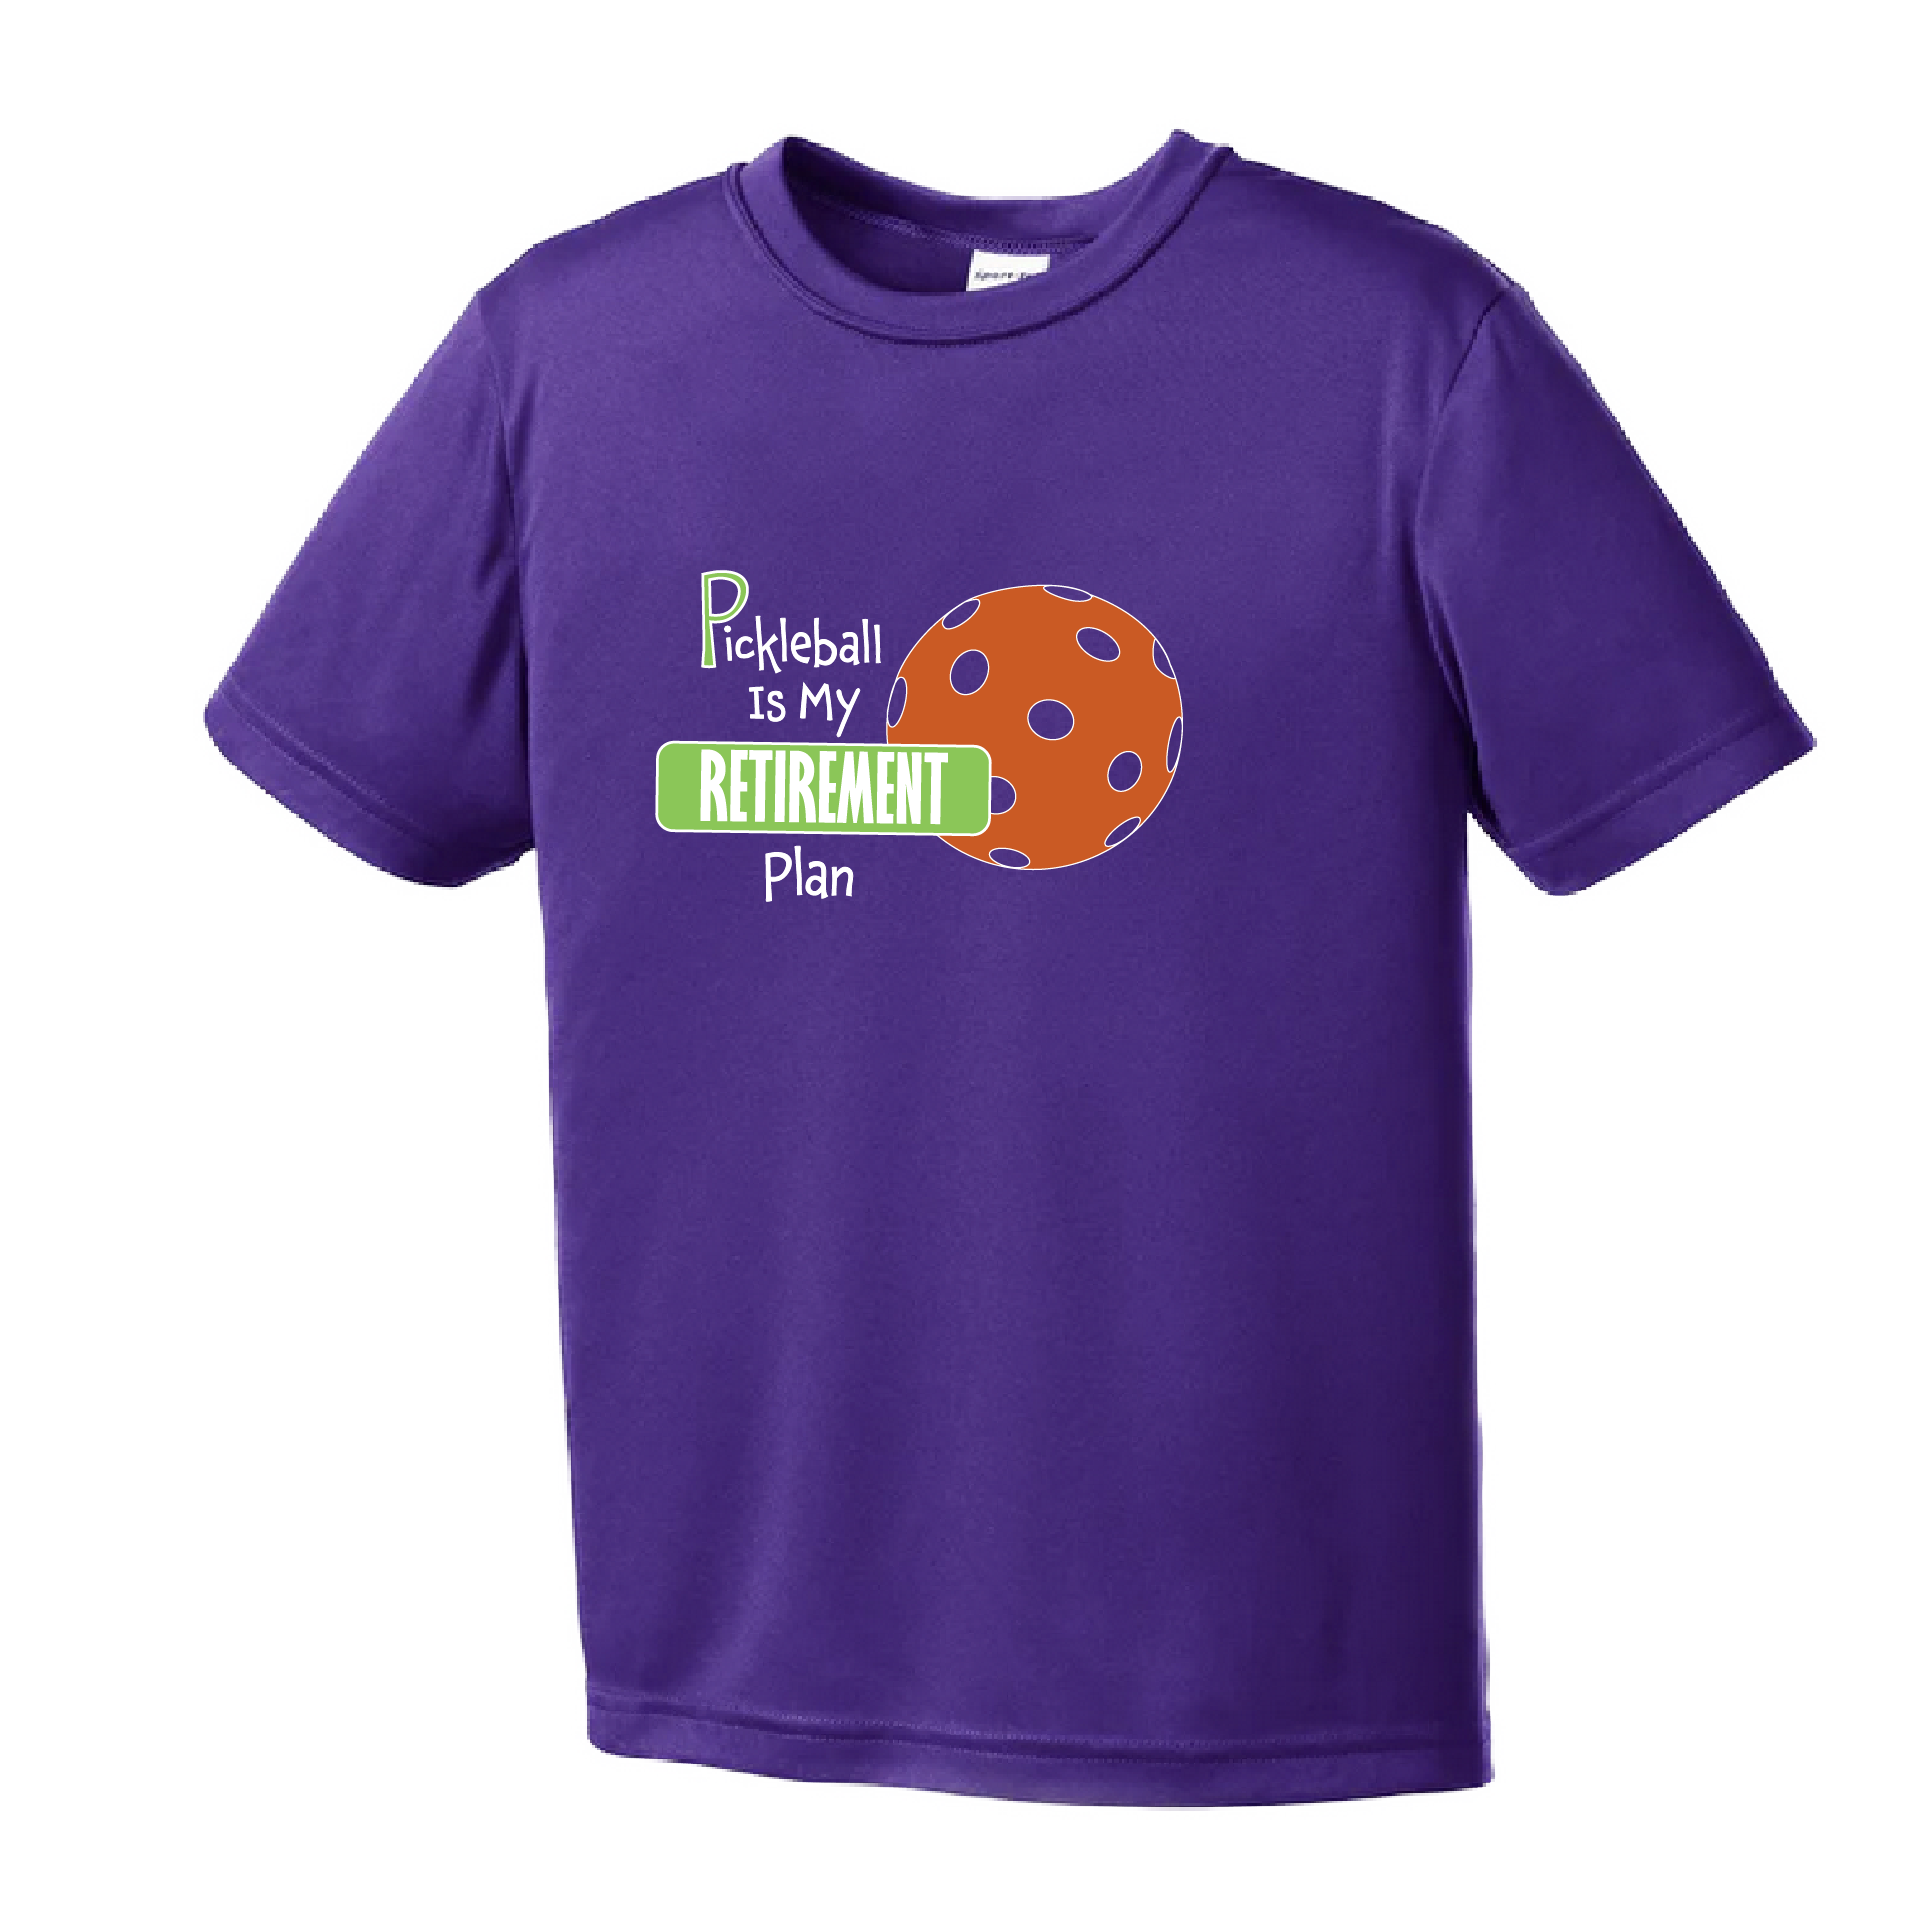 Pickleball Design: Pickleball is my Retirement Plan  Youth Style: Short Sleeve  Shirts are lightweight, roomy and highly breathable. These moisture-wicking shirts are designed for athletic performance. They feature PosiCharge technology to lock in color and prevent logos from fading. Removable tag and set-in sleeves for comfort.